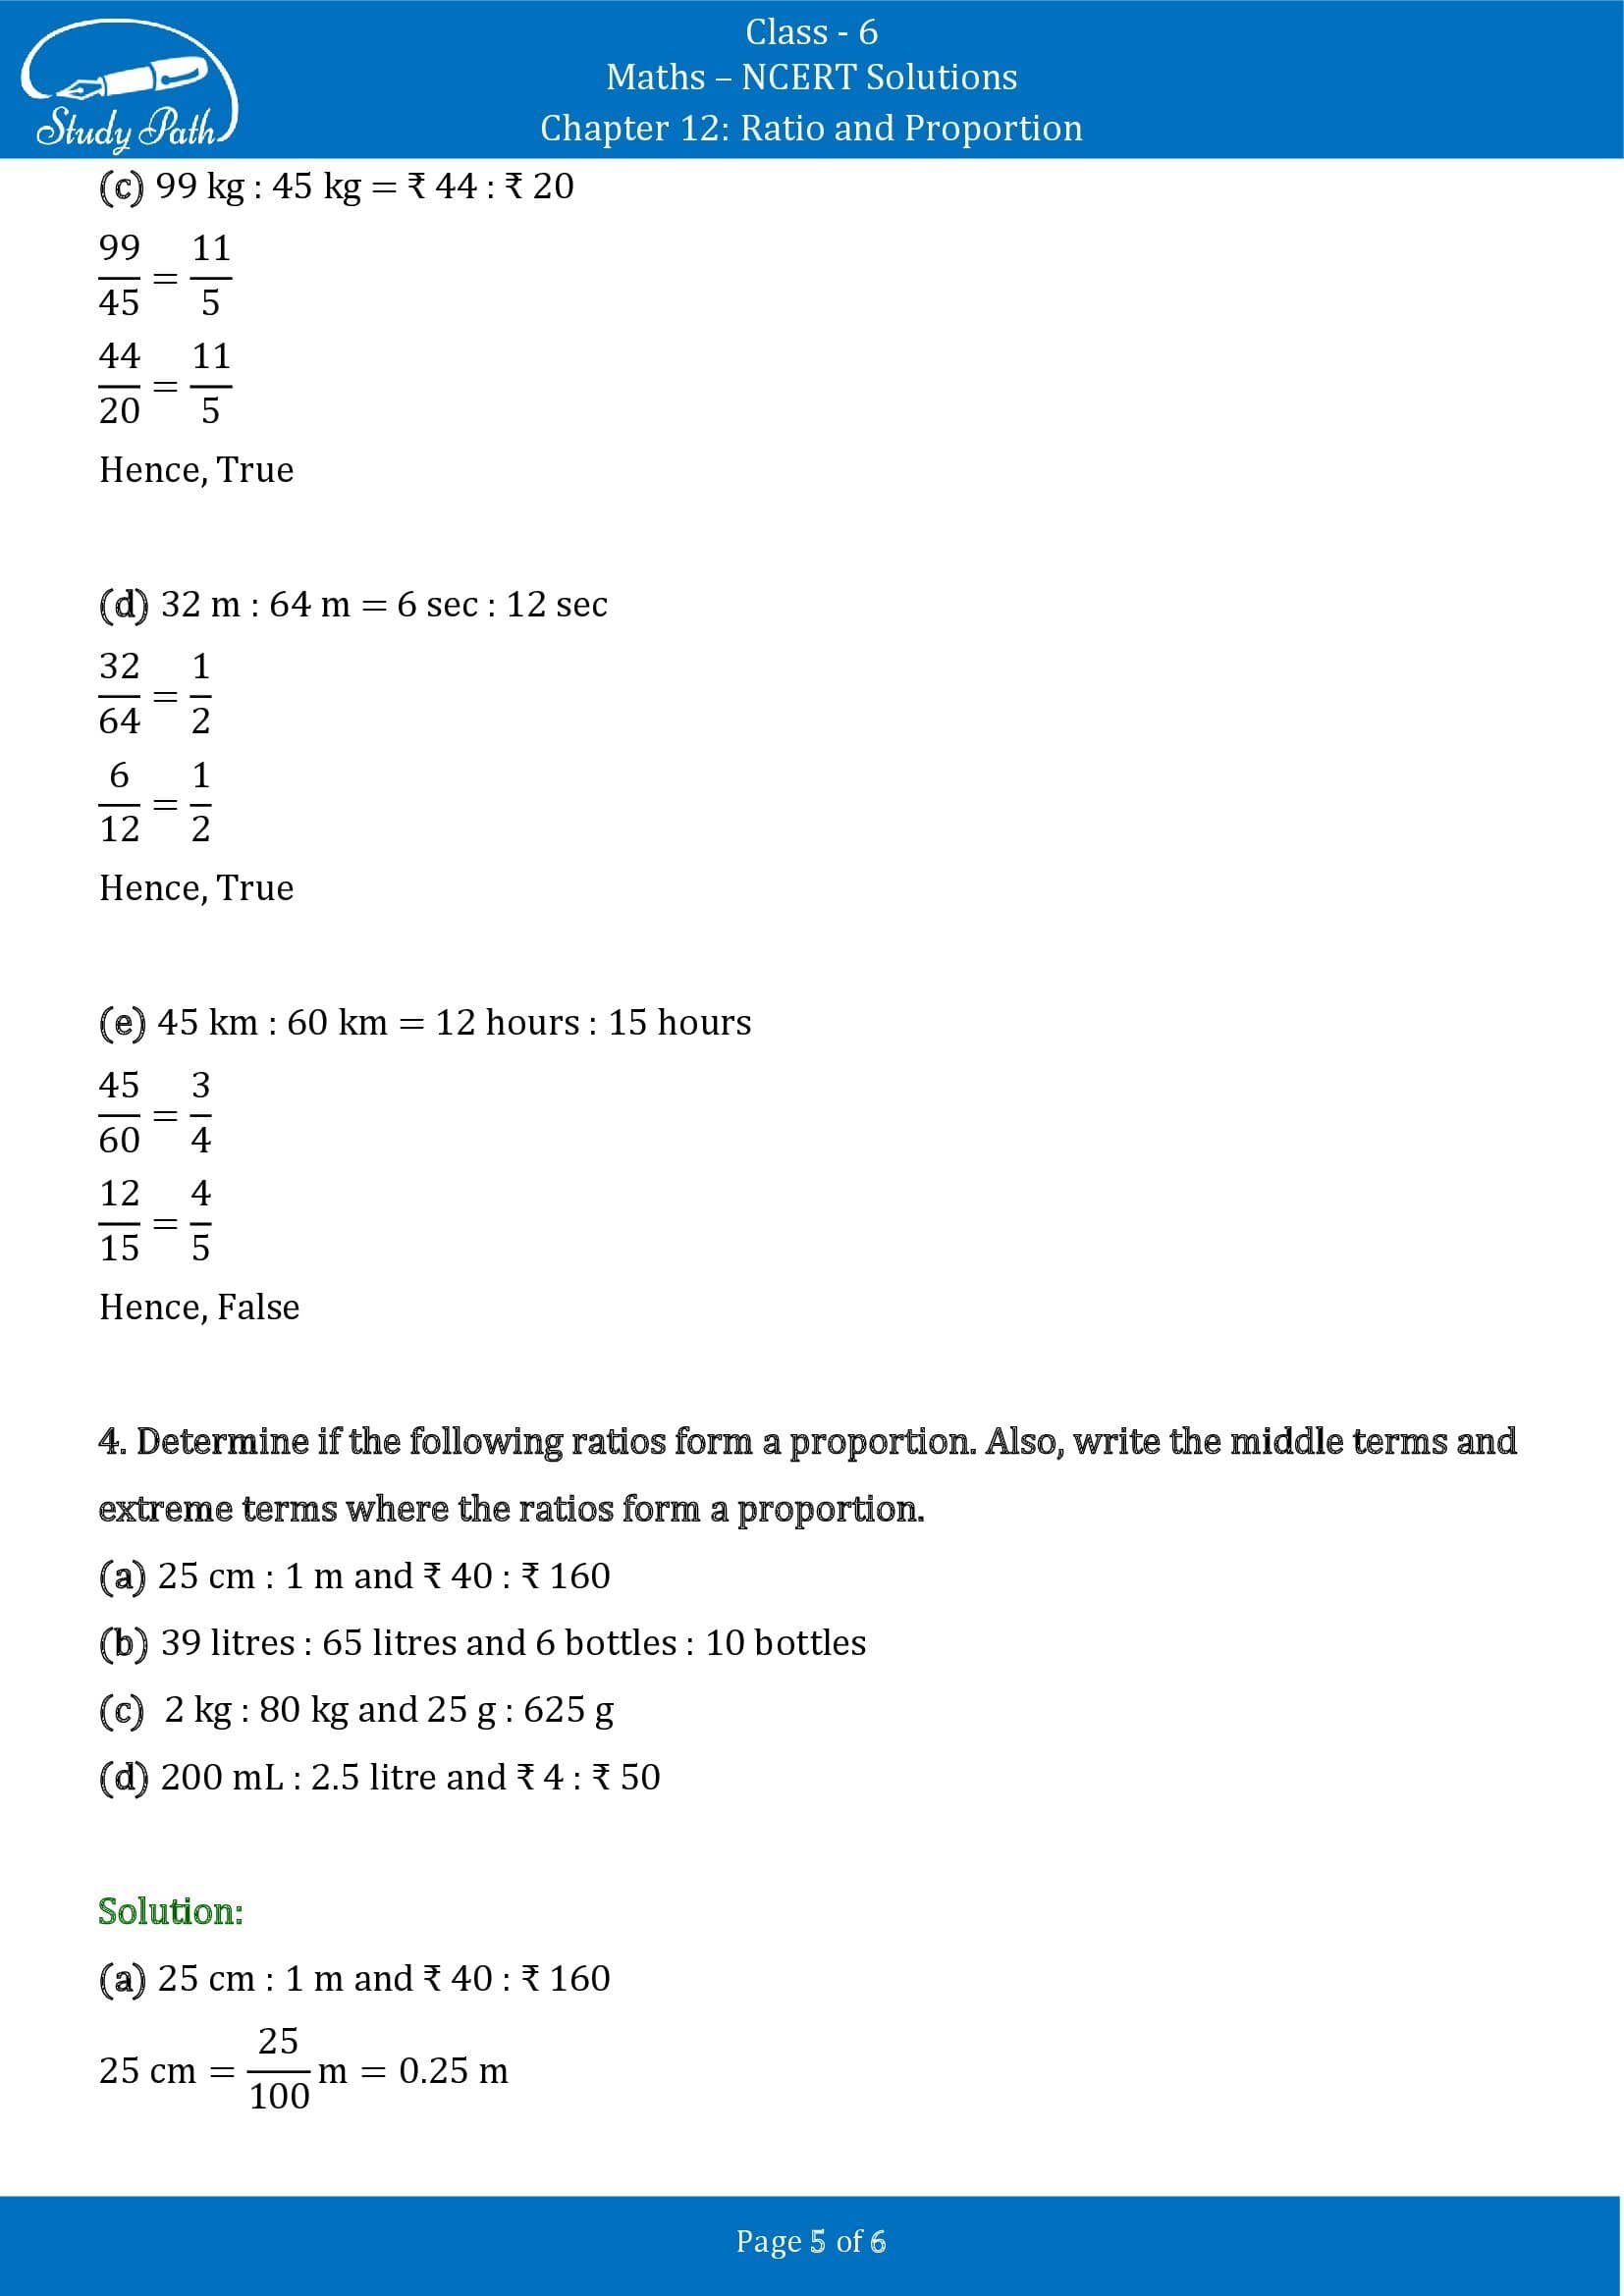 NCERT Solutions for Class 6 Maths Chapter 12 Ratio and Proportion Exercise 12.2 00005